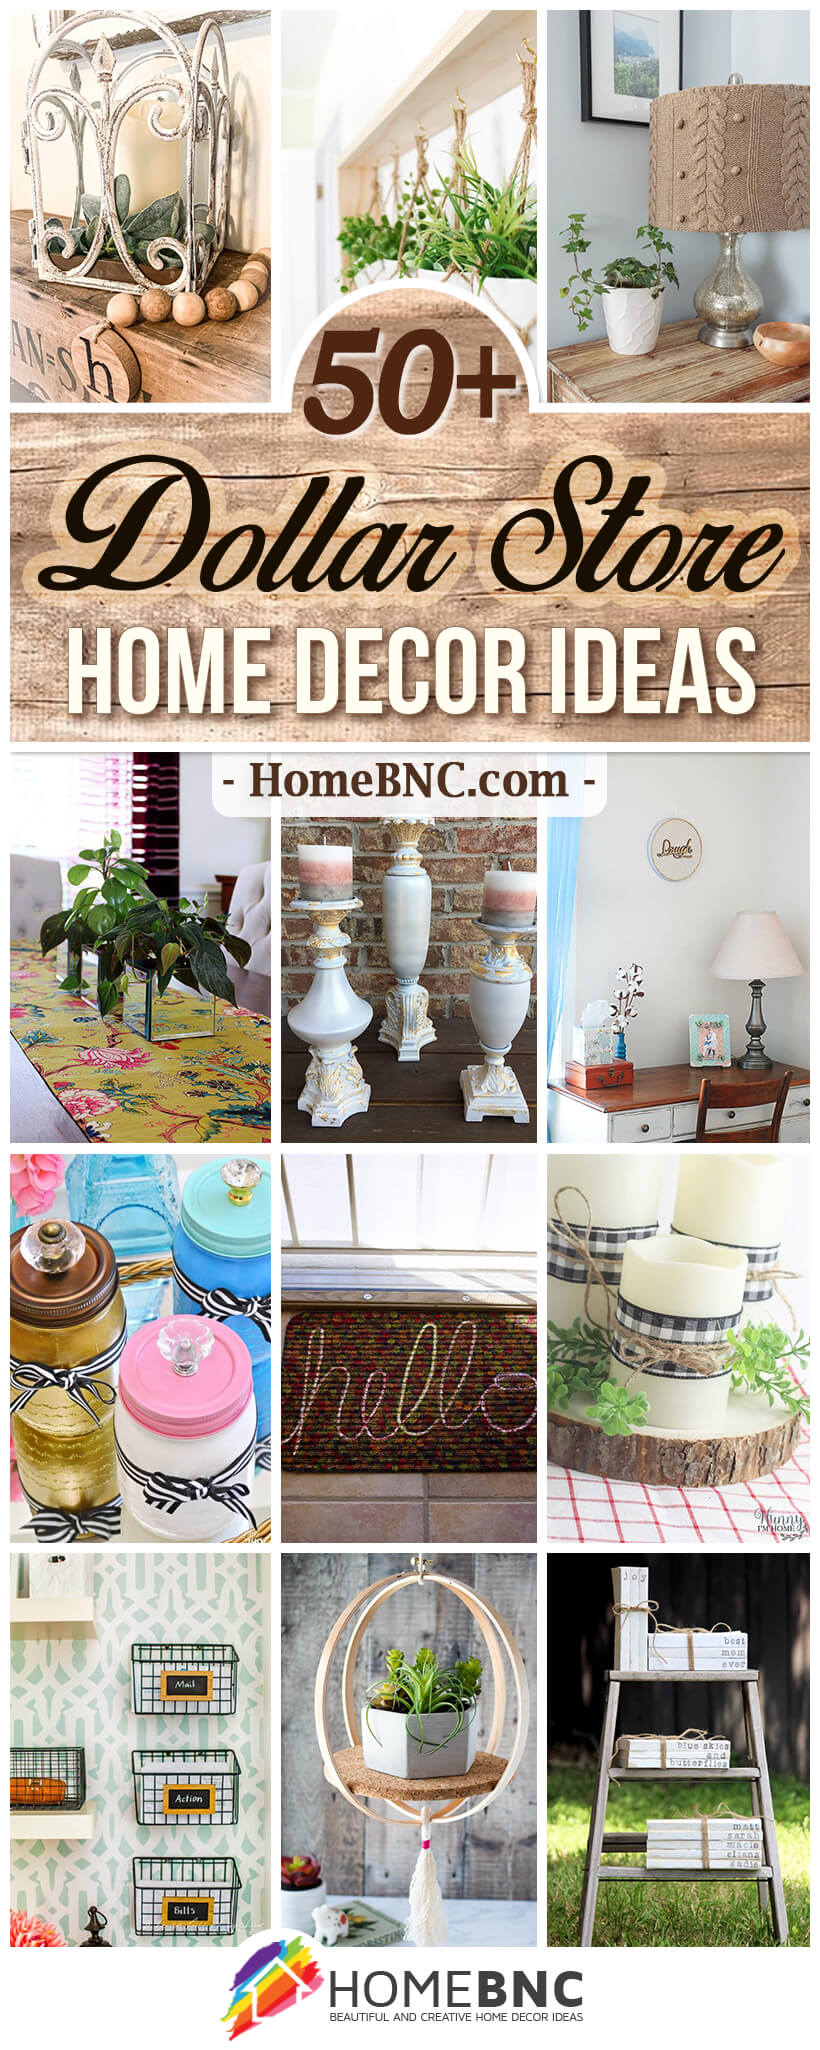 How To Find The Time To Home Decor Trends 2022 On Facebook